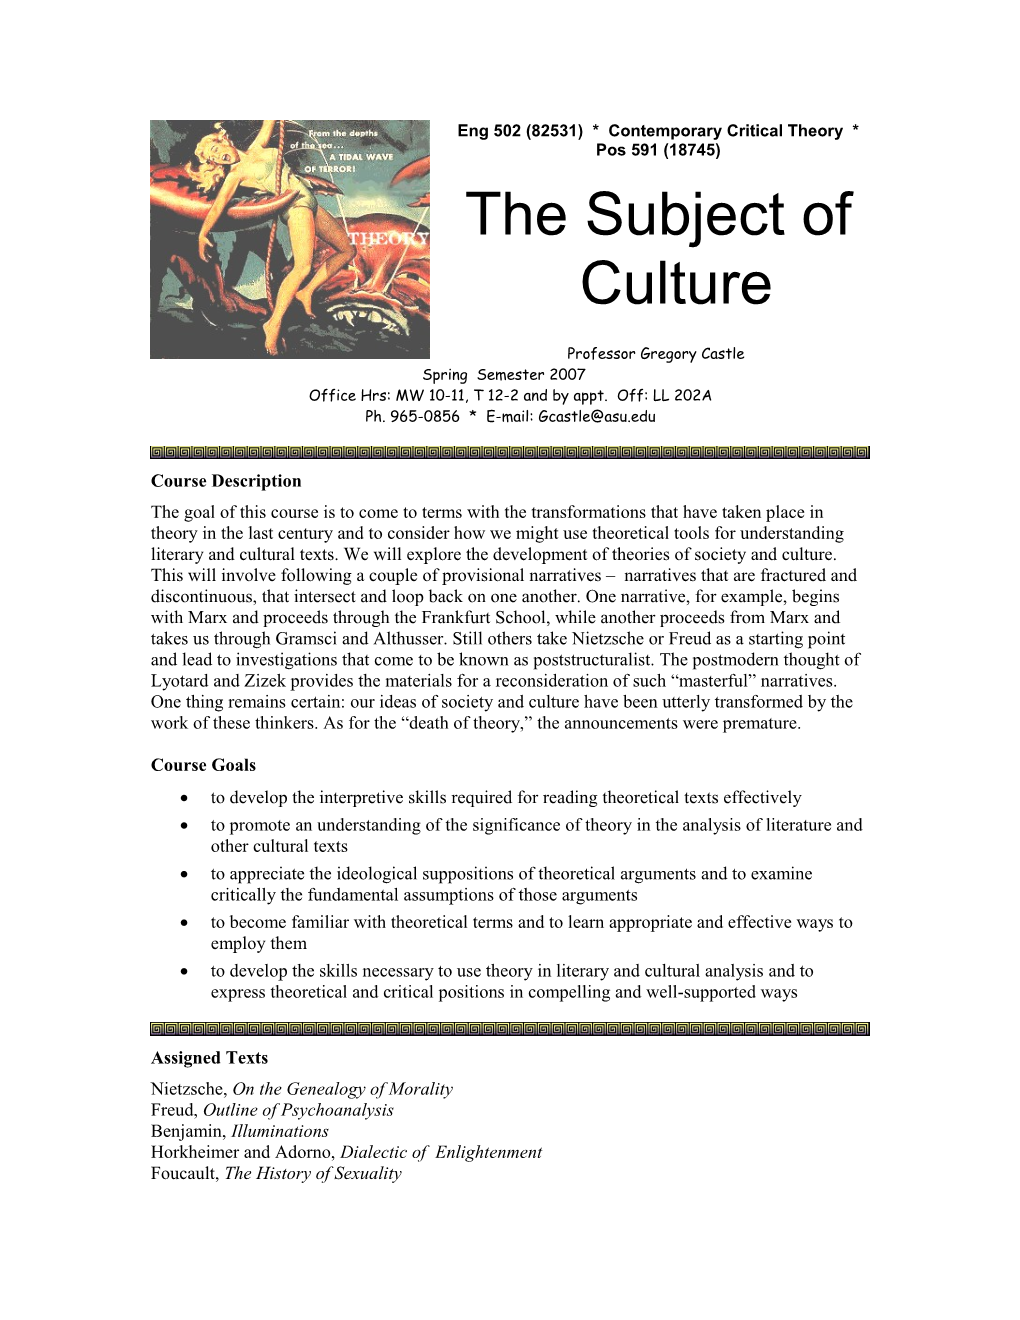 Theories of Society and Culture